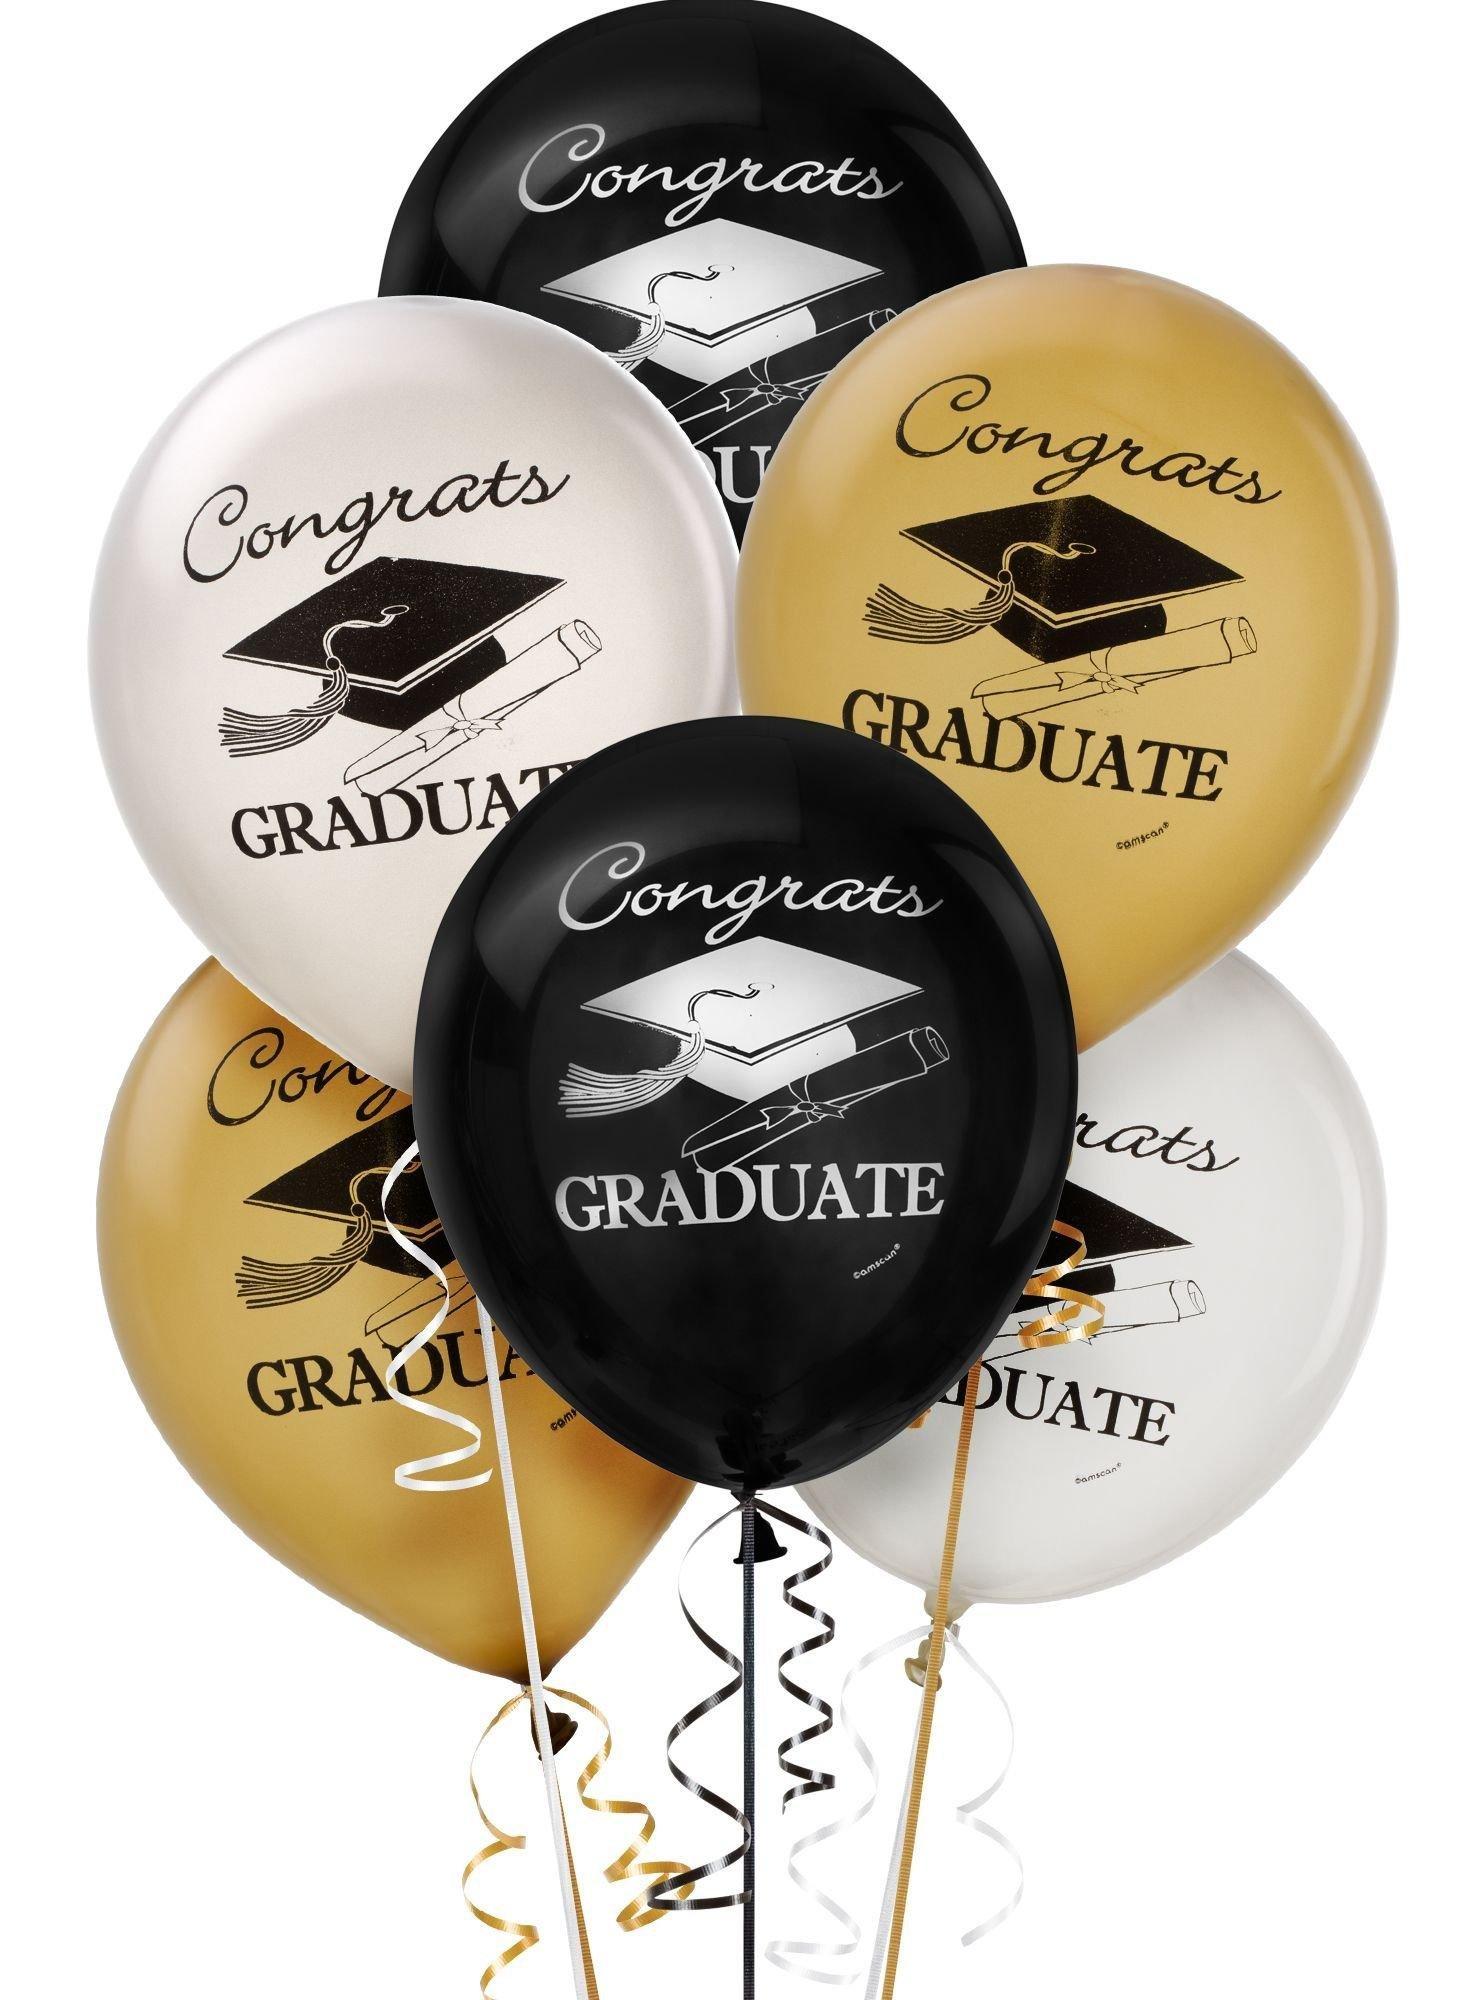 Graduation Party Supplies Kit for 20 with Decorations, Banners, Balloons, Plates, Napkins, Cups - Black, Silver & Gold Celebrate the Grad